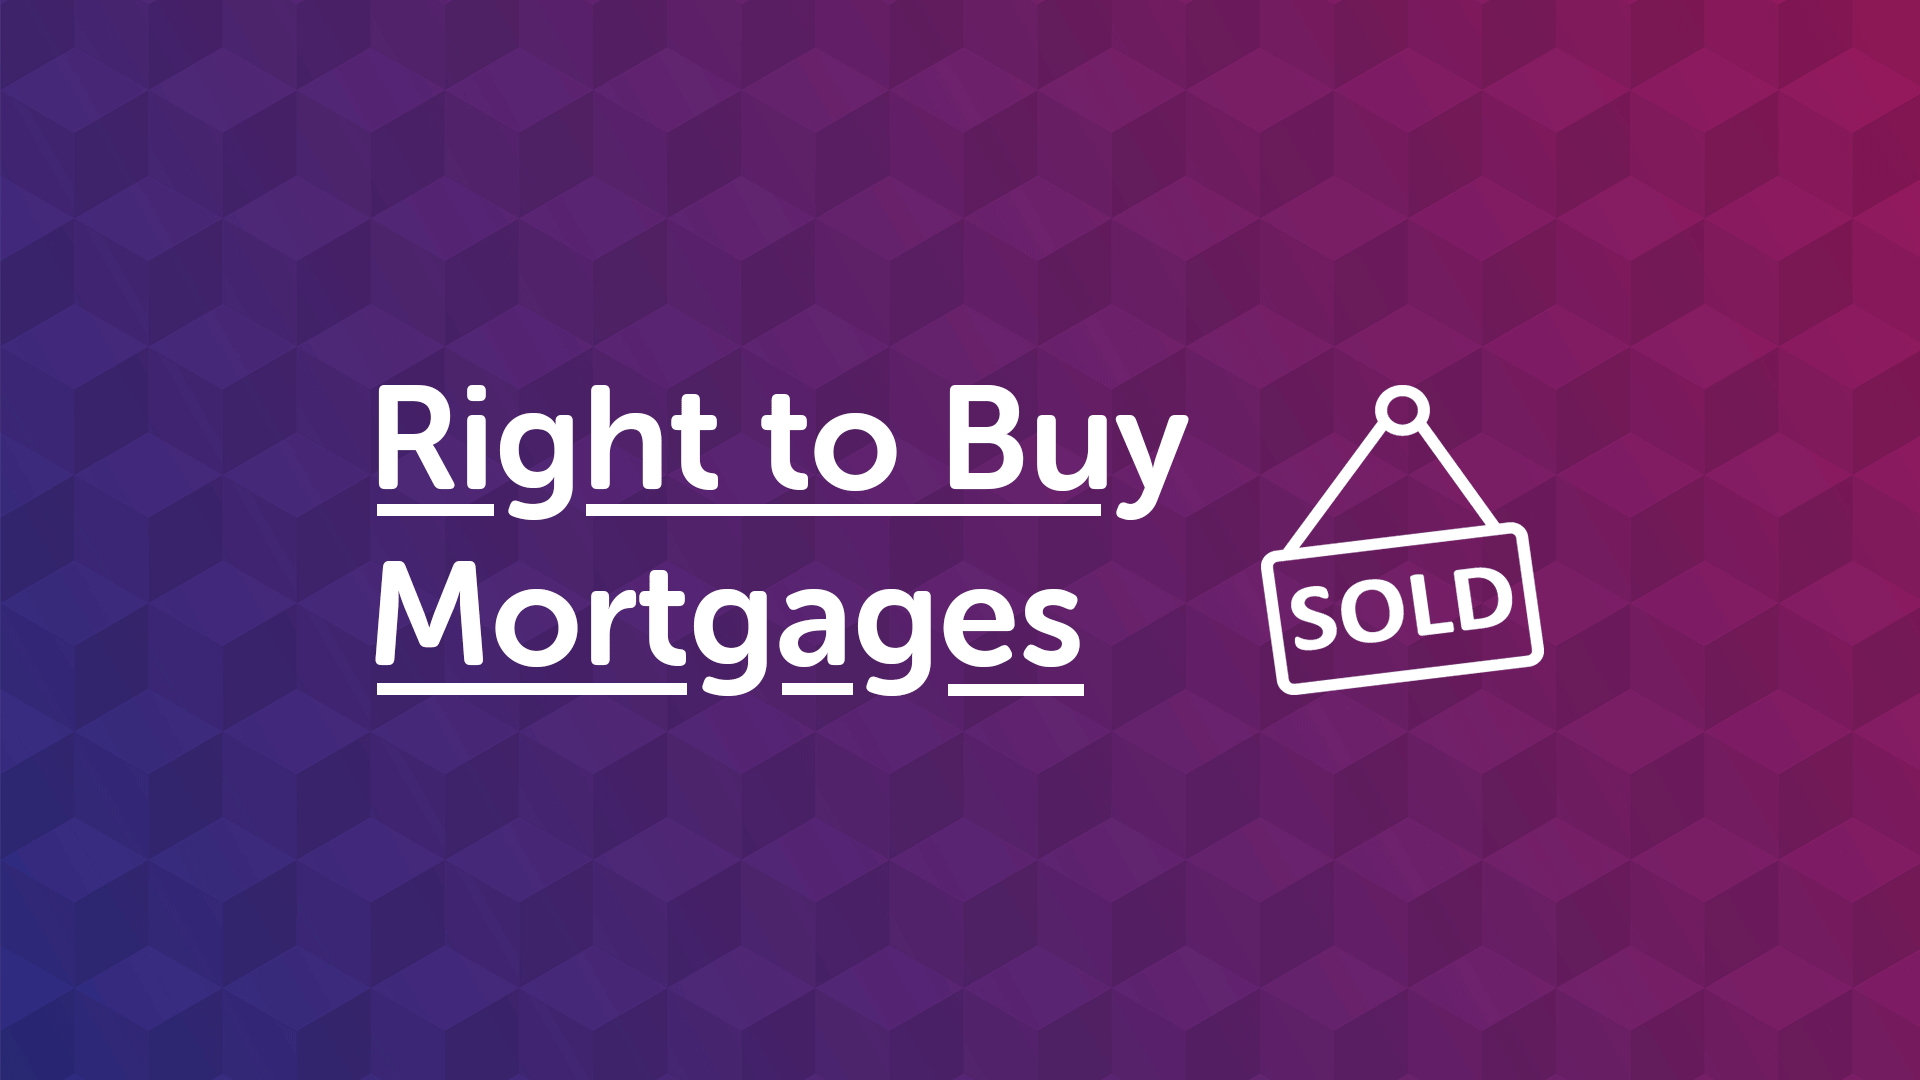 Right to Buy Mortgage Advice in Durham